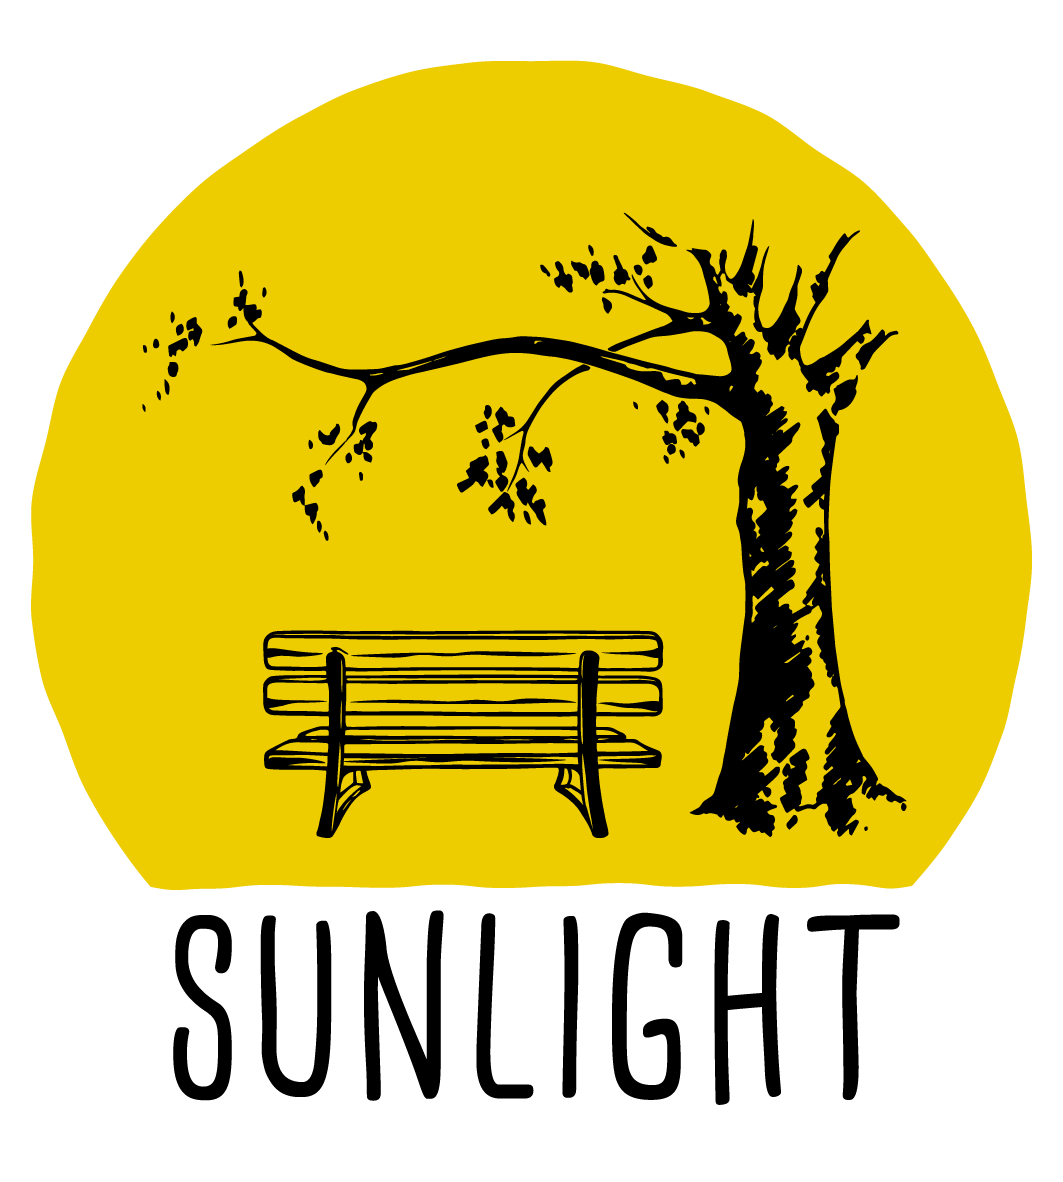 The Sunlight logo, a bench under a tree in stylized black ink, cast against a large yellow sun, with the text Sunlight underneath